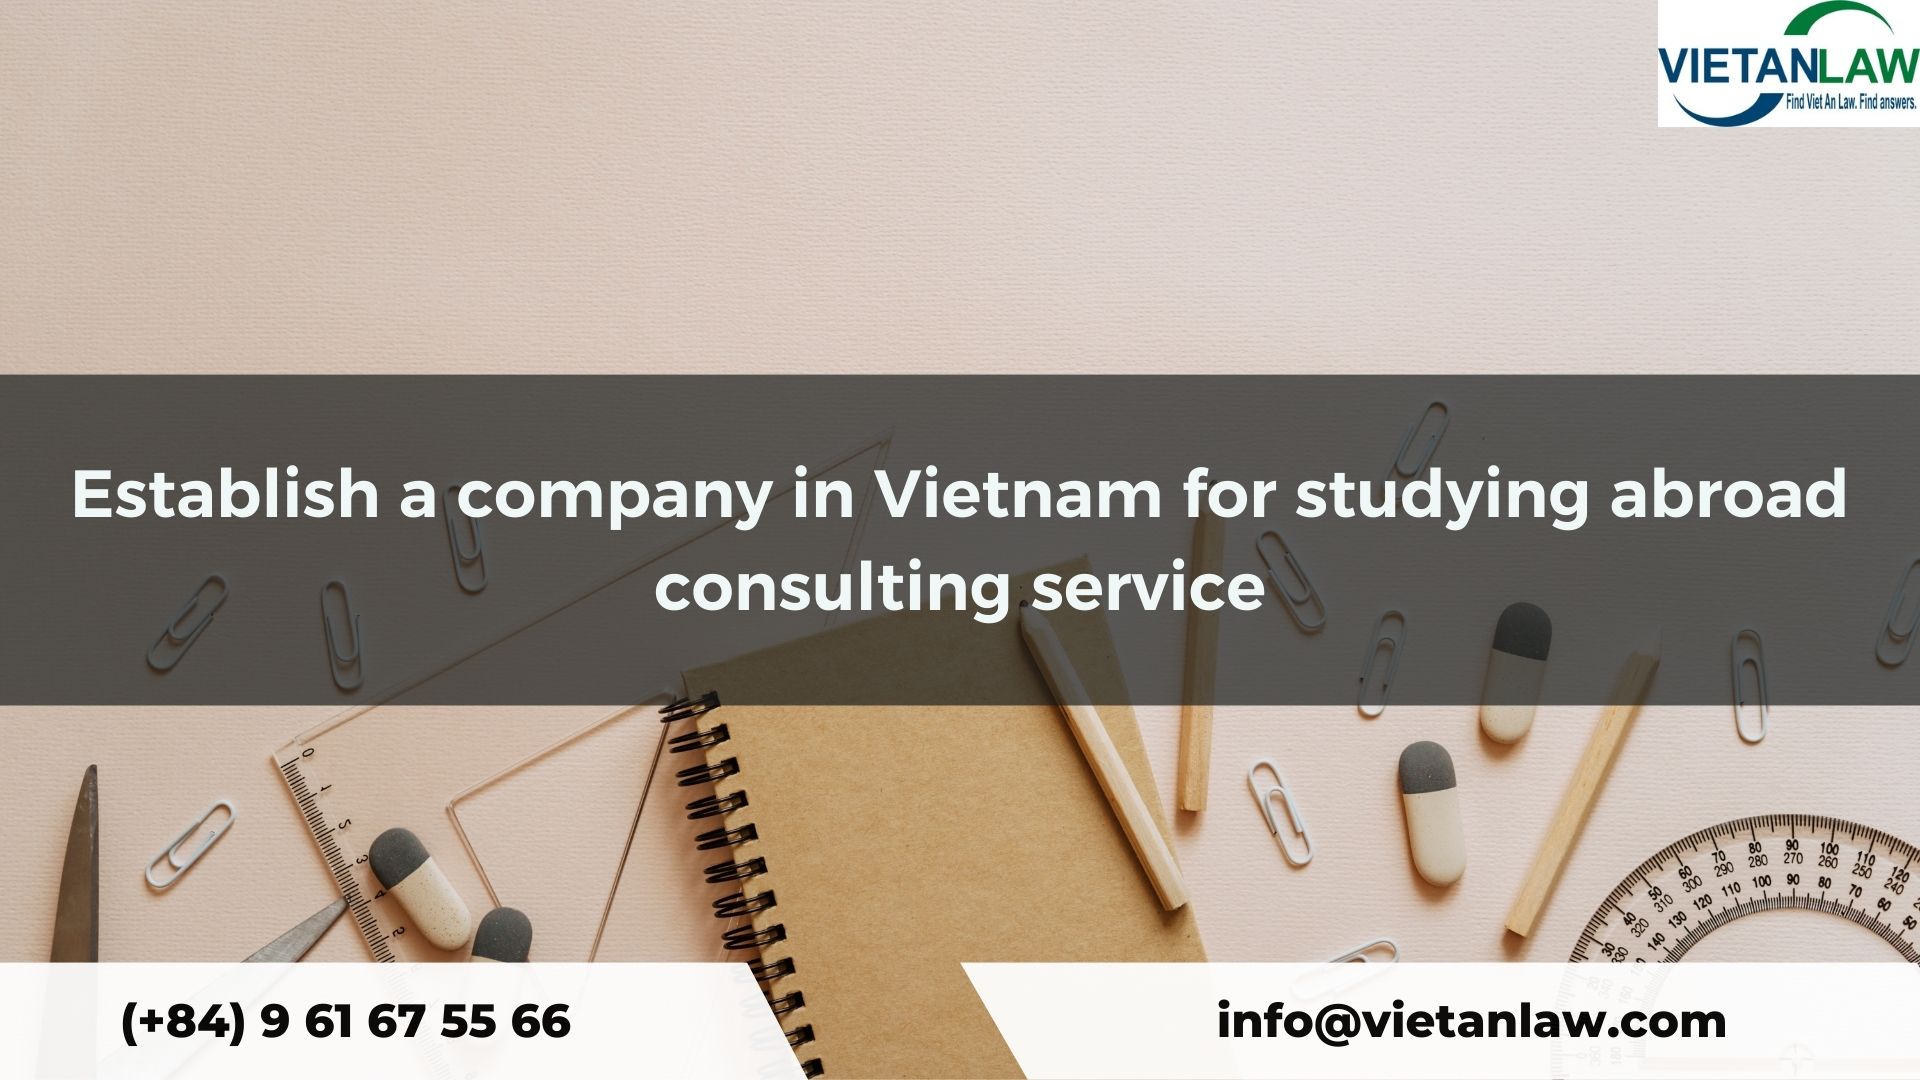 Establish a company in Vietnam for studying abroad consulting service